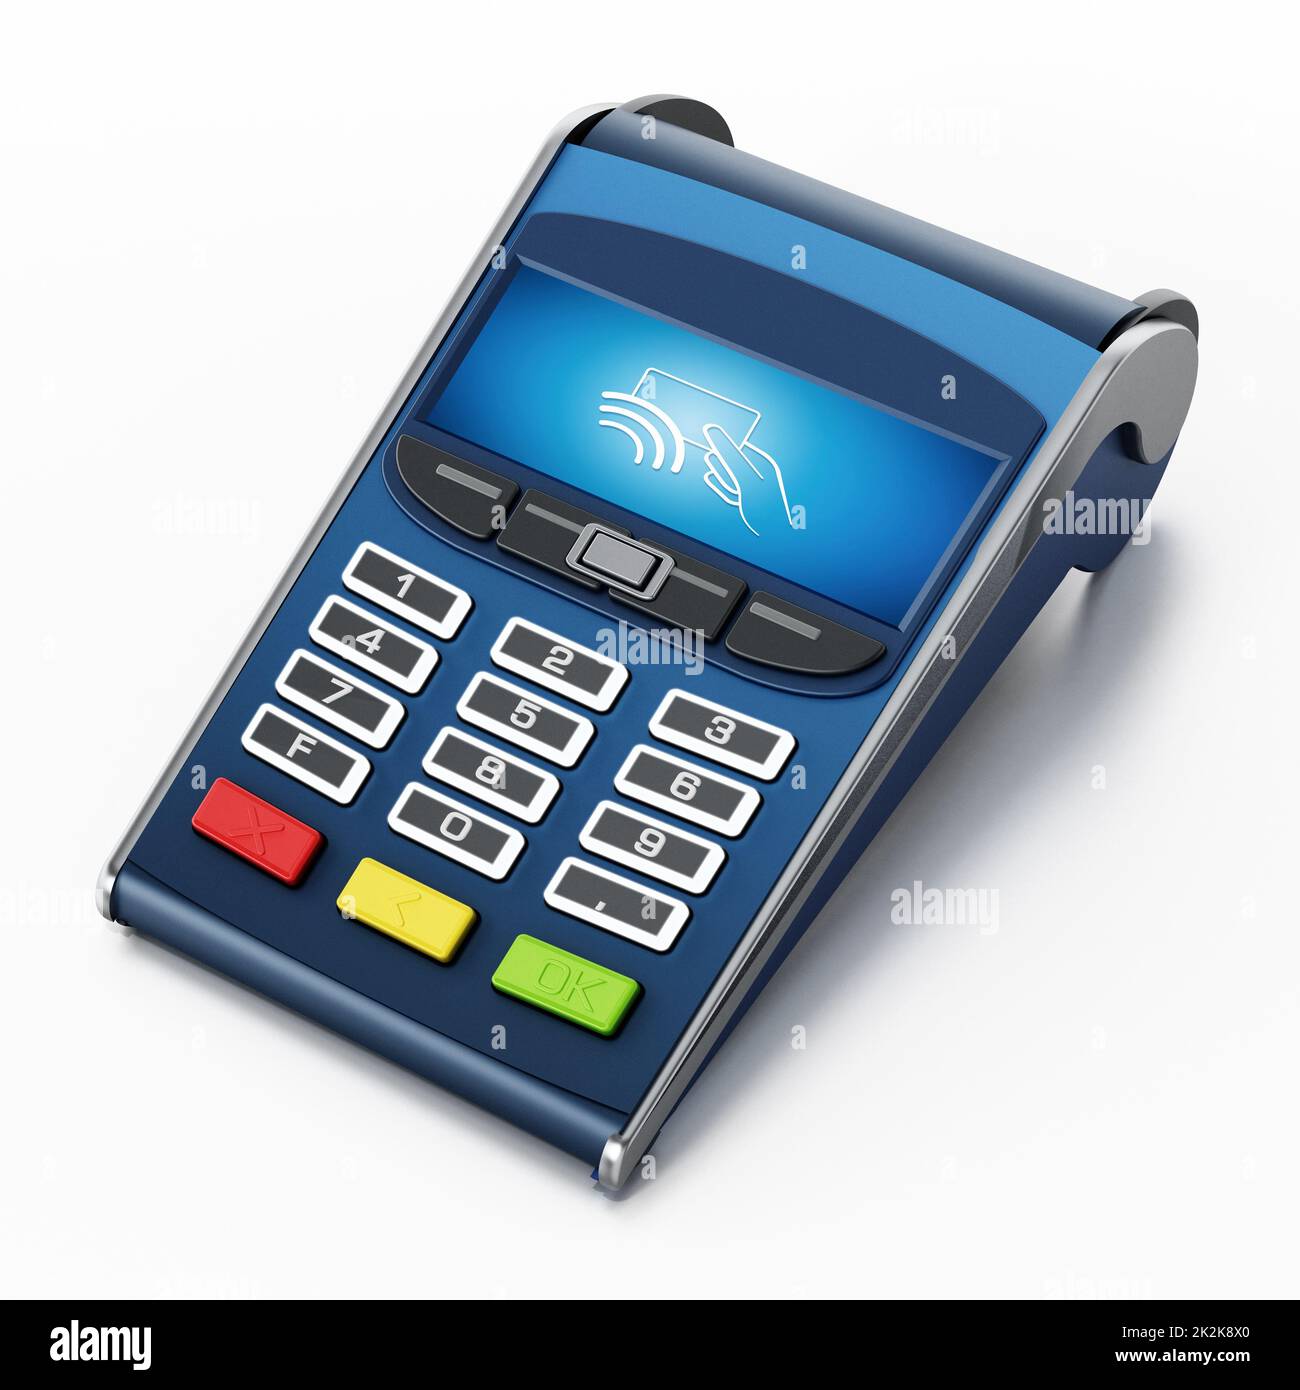 POS terminal with remote wireless symbol on the screen. 3D illustration Stock Photo